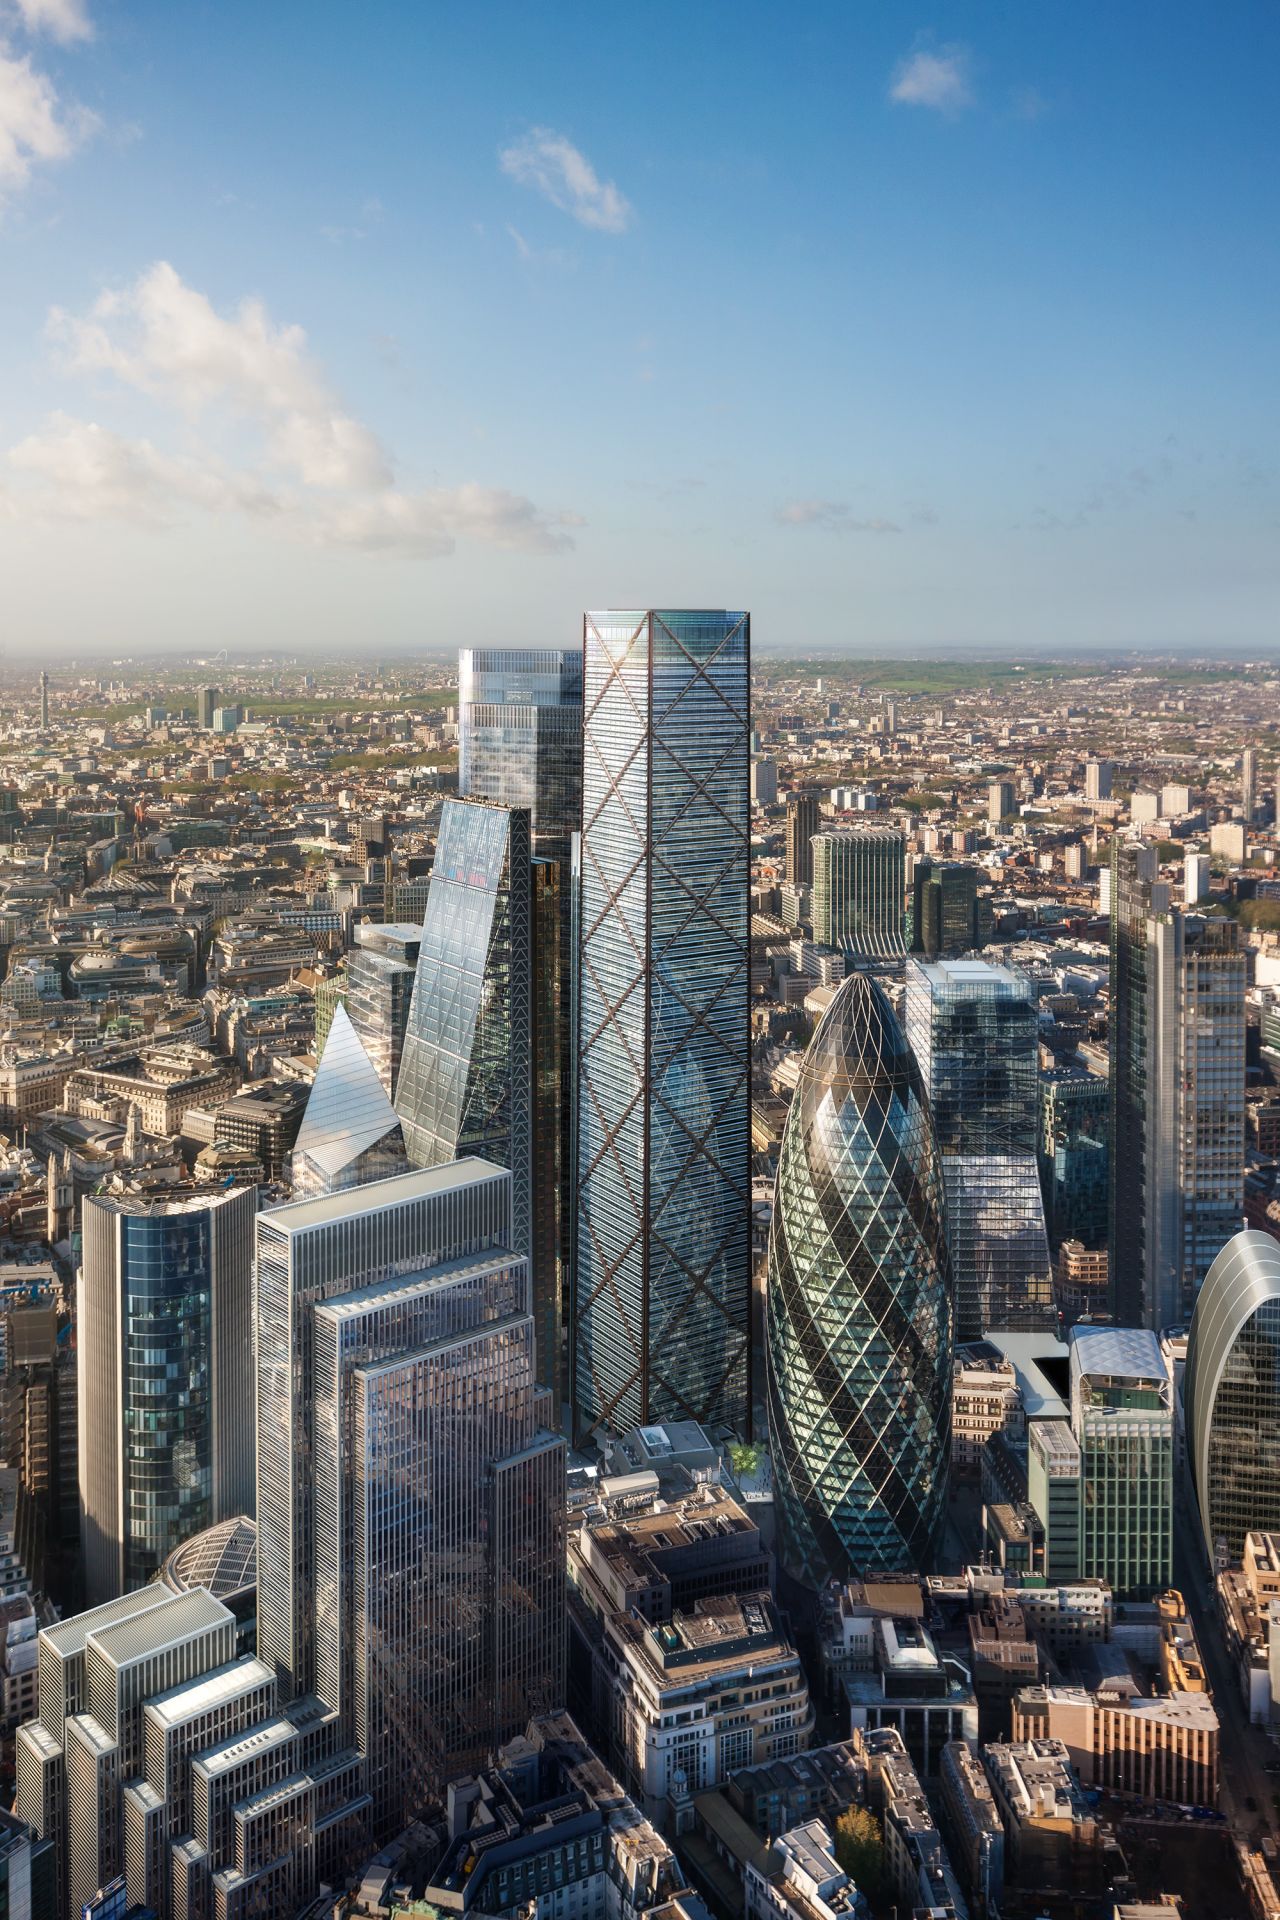 In December 2015, plans were unveiled for 1 Undershaft -- a 300 meter (984 feet) tall building that could become the City of London's tallest skyscraper.